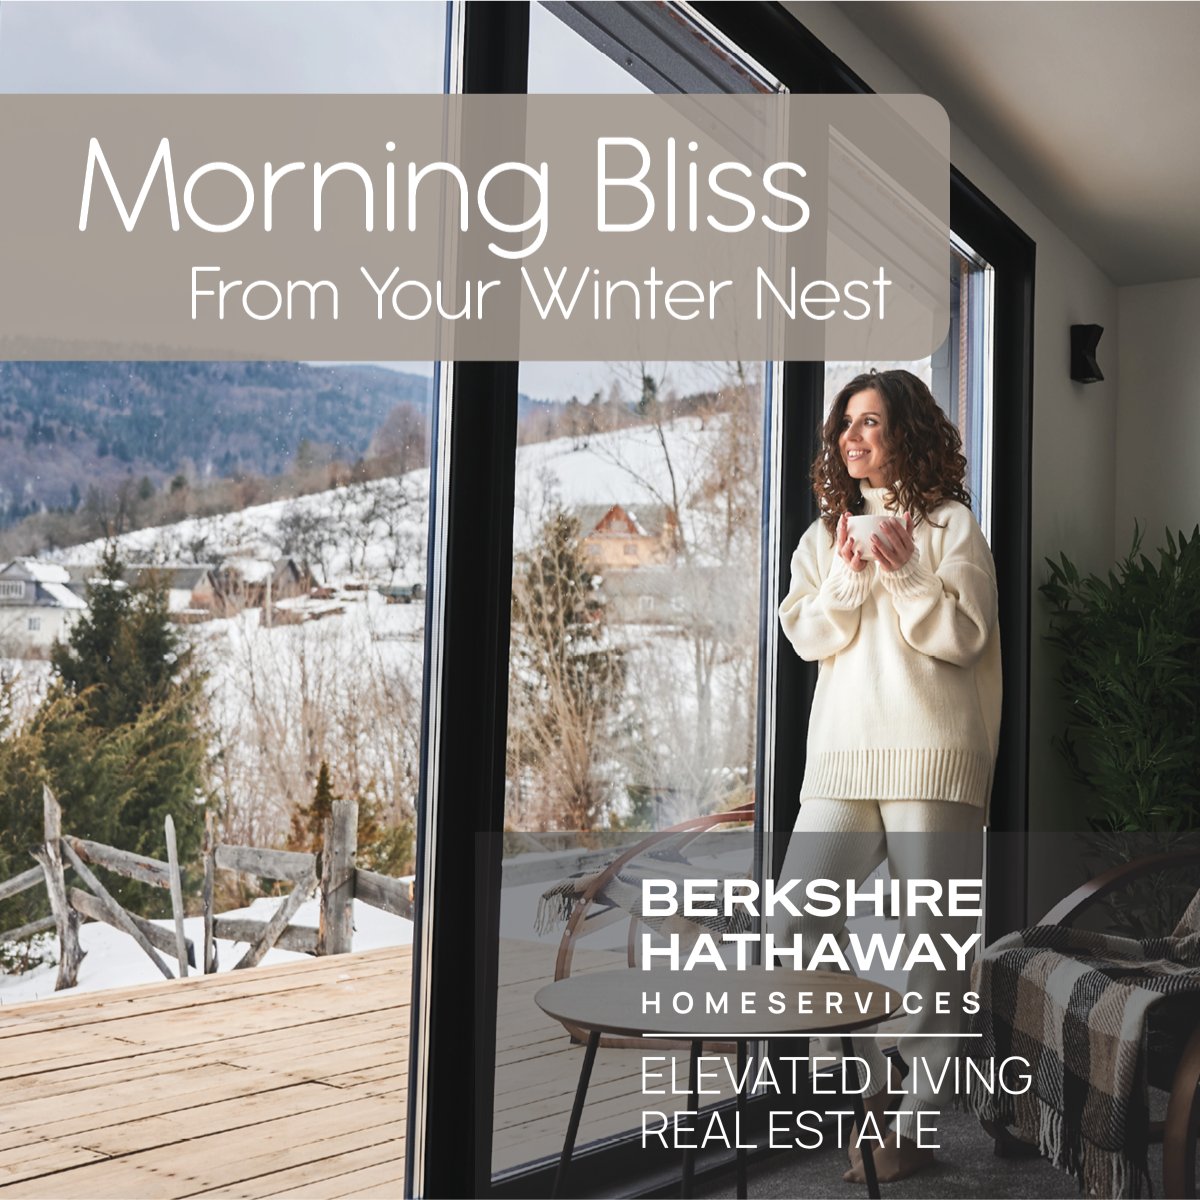 Ready to find your #SnowSeason dream home? Get in touch today! #BHHS #BHHSRealEstate #ForeverAgent #ForeverBrand #WinterLiving #WinterRealEstate #HomeSweetHome  #Colorado #CO #JeffCo #Evergreen #Morrison #Pine #Bailey #Golden #Genessee #Foothills